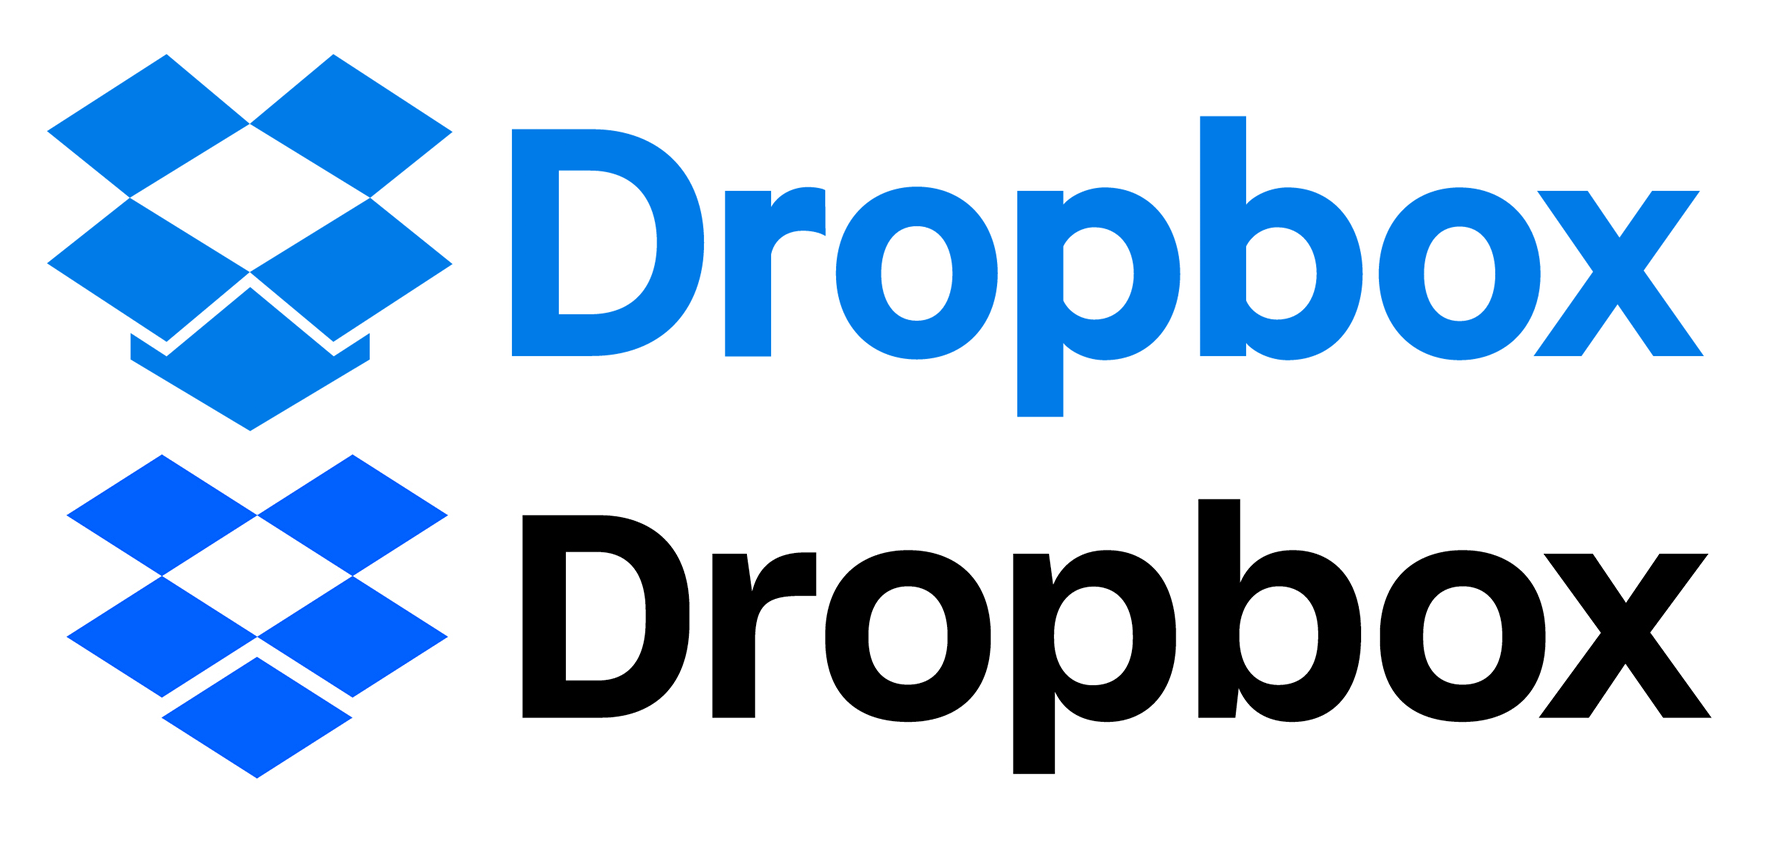 Update Logo - Dropbox brand update streamlines its logo and takes aim at creatives ...